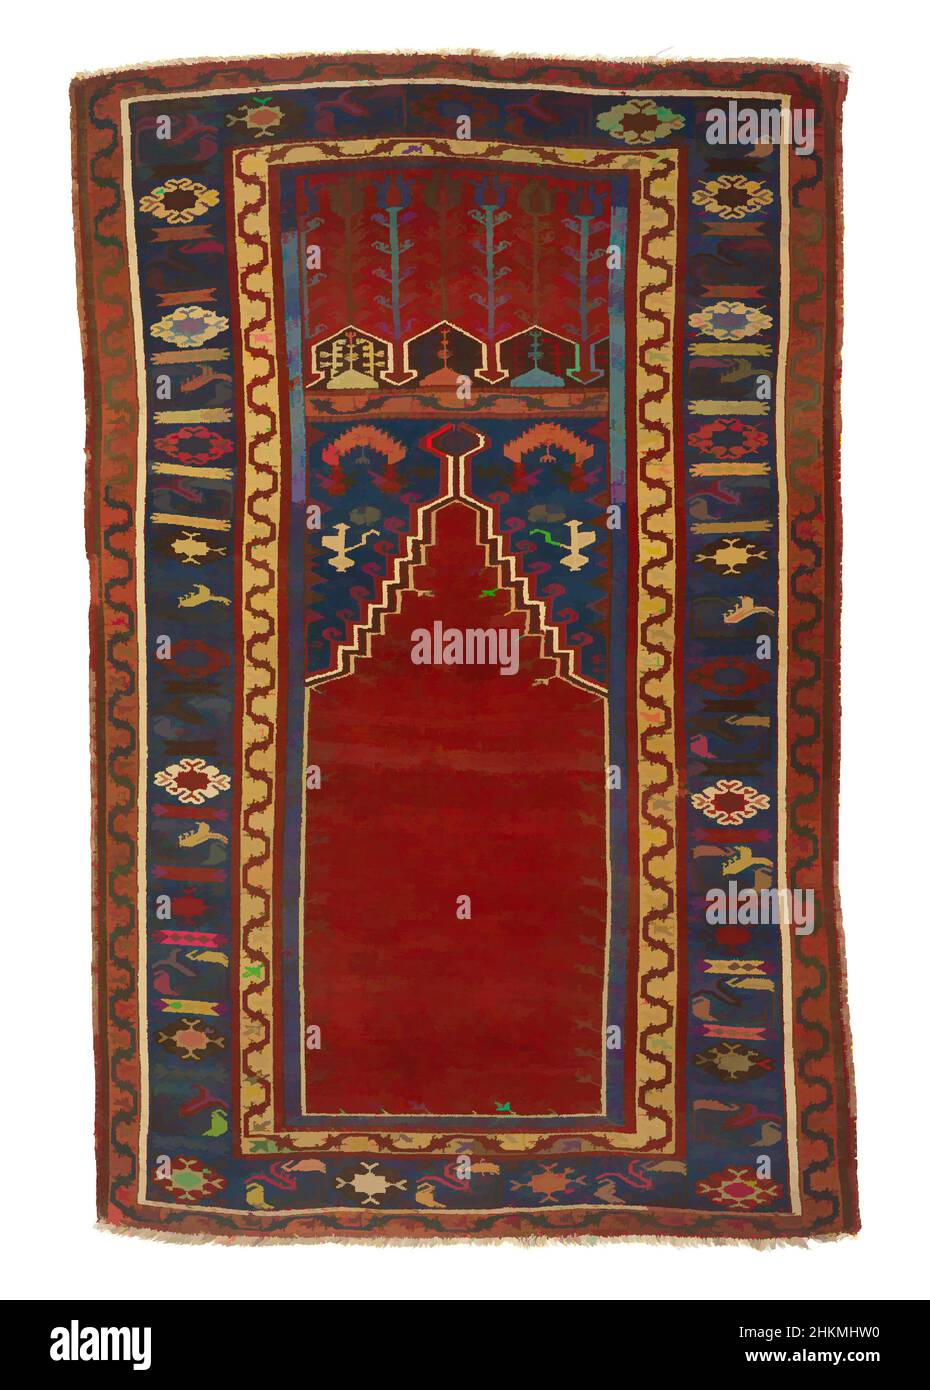 Art inspired by Ladik Prayer Carpet (seccade) on Red Ground, Ottoman period, 1281-1924, c.1800, Wool, Made in Konya province, Anatolia, Turkey, Asia, Coverings & hangings, textiles, 79 1/2 x 50 1/2 in. (201.9 x 128.3 cm, Classic works modernized by Artotop with a splash of modernity. Shapes, color and value, eye-catching visual impact on art. Emotions through freedom of artworks in a contemporary way. A timeless message pursuing a wildly creative new direction. Artists turning to the digital medium and creating the Artotop NFT Stock Photo